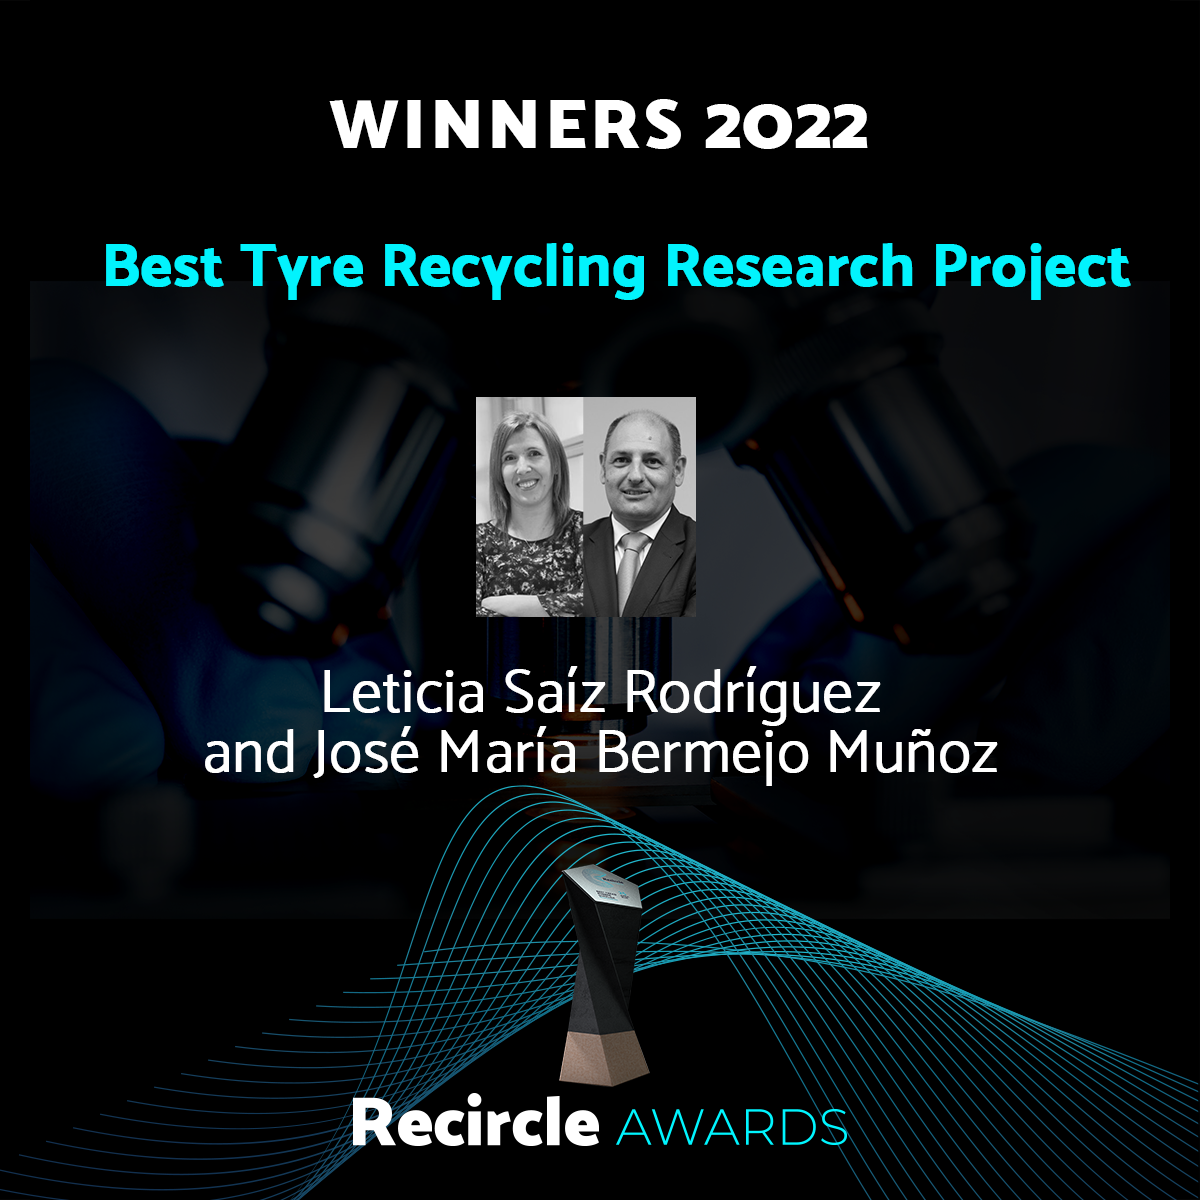 Best Tyre Recycling Research Project 22